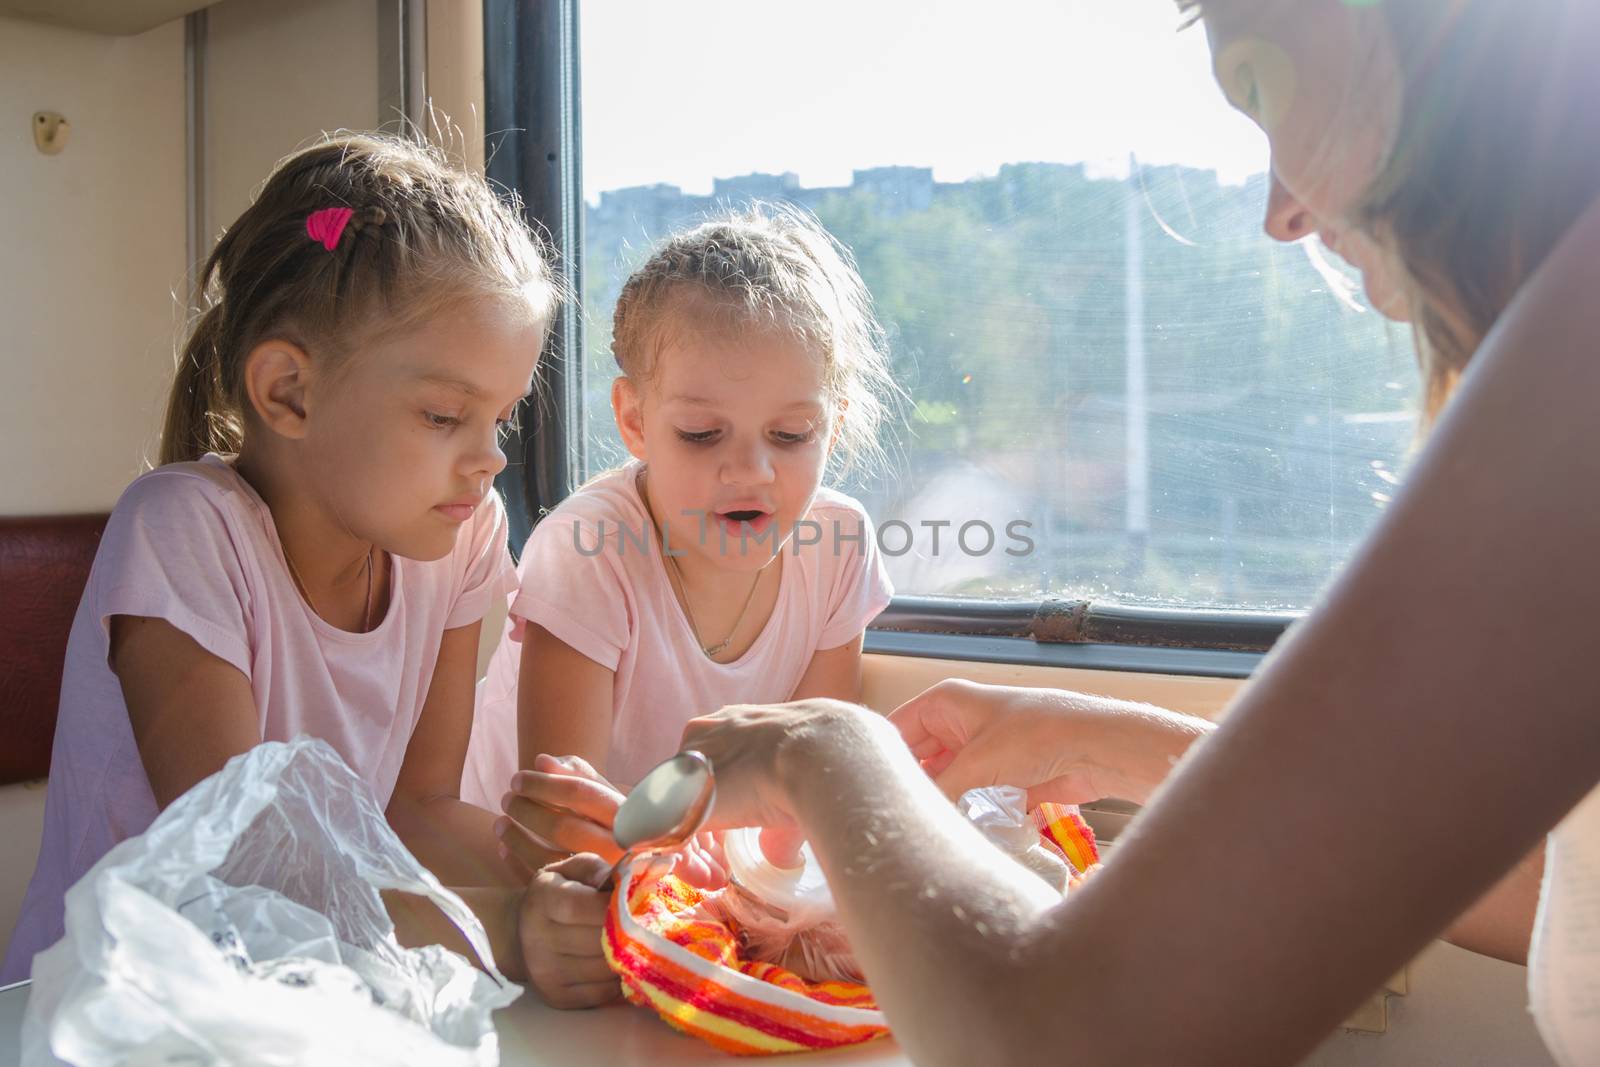 My mother unpacks prepared home food for hungry children in second-class train carriage